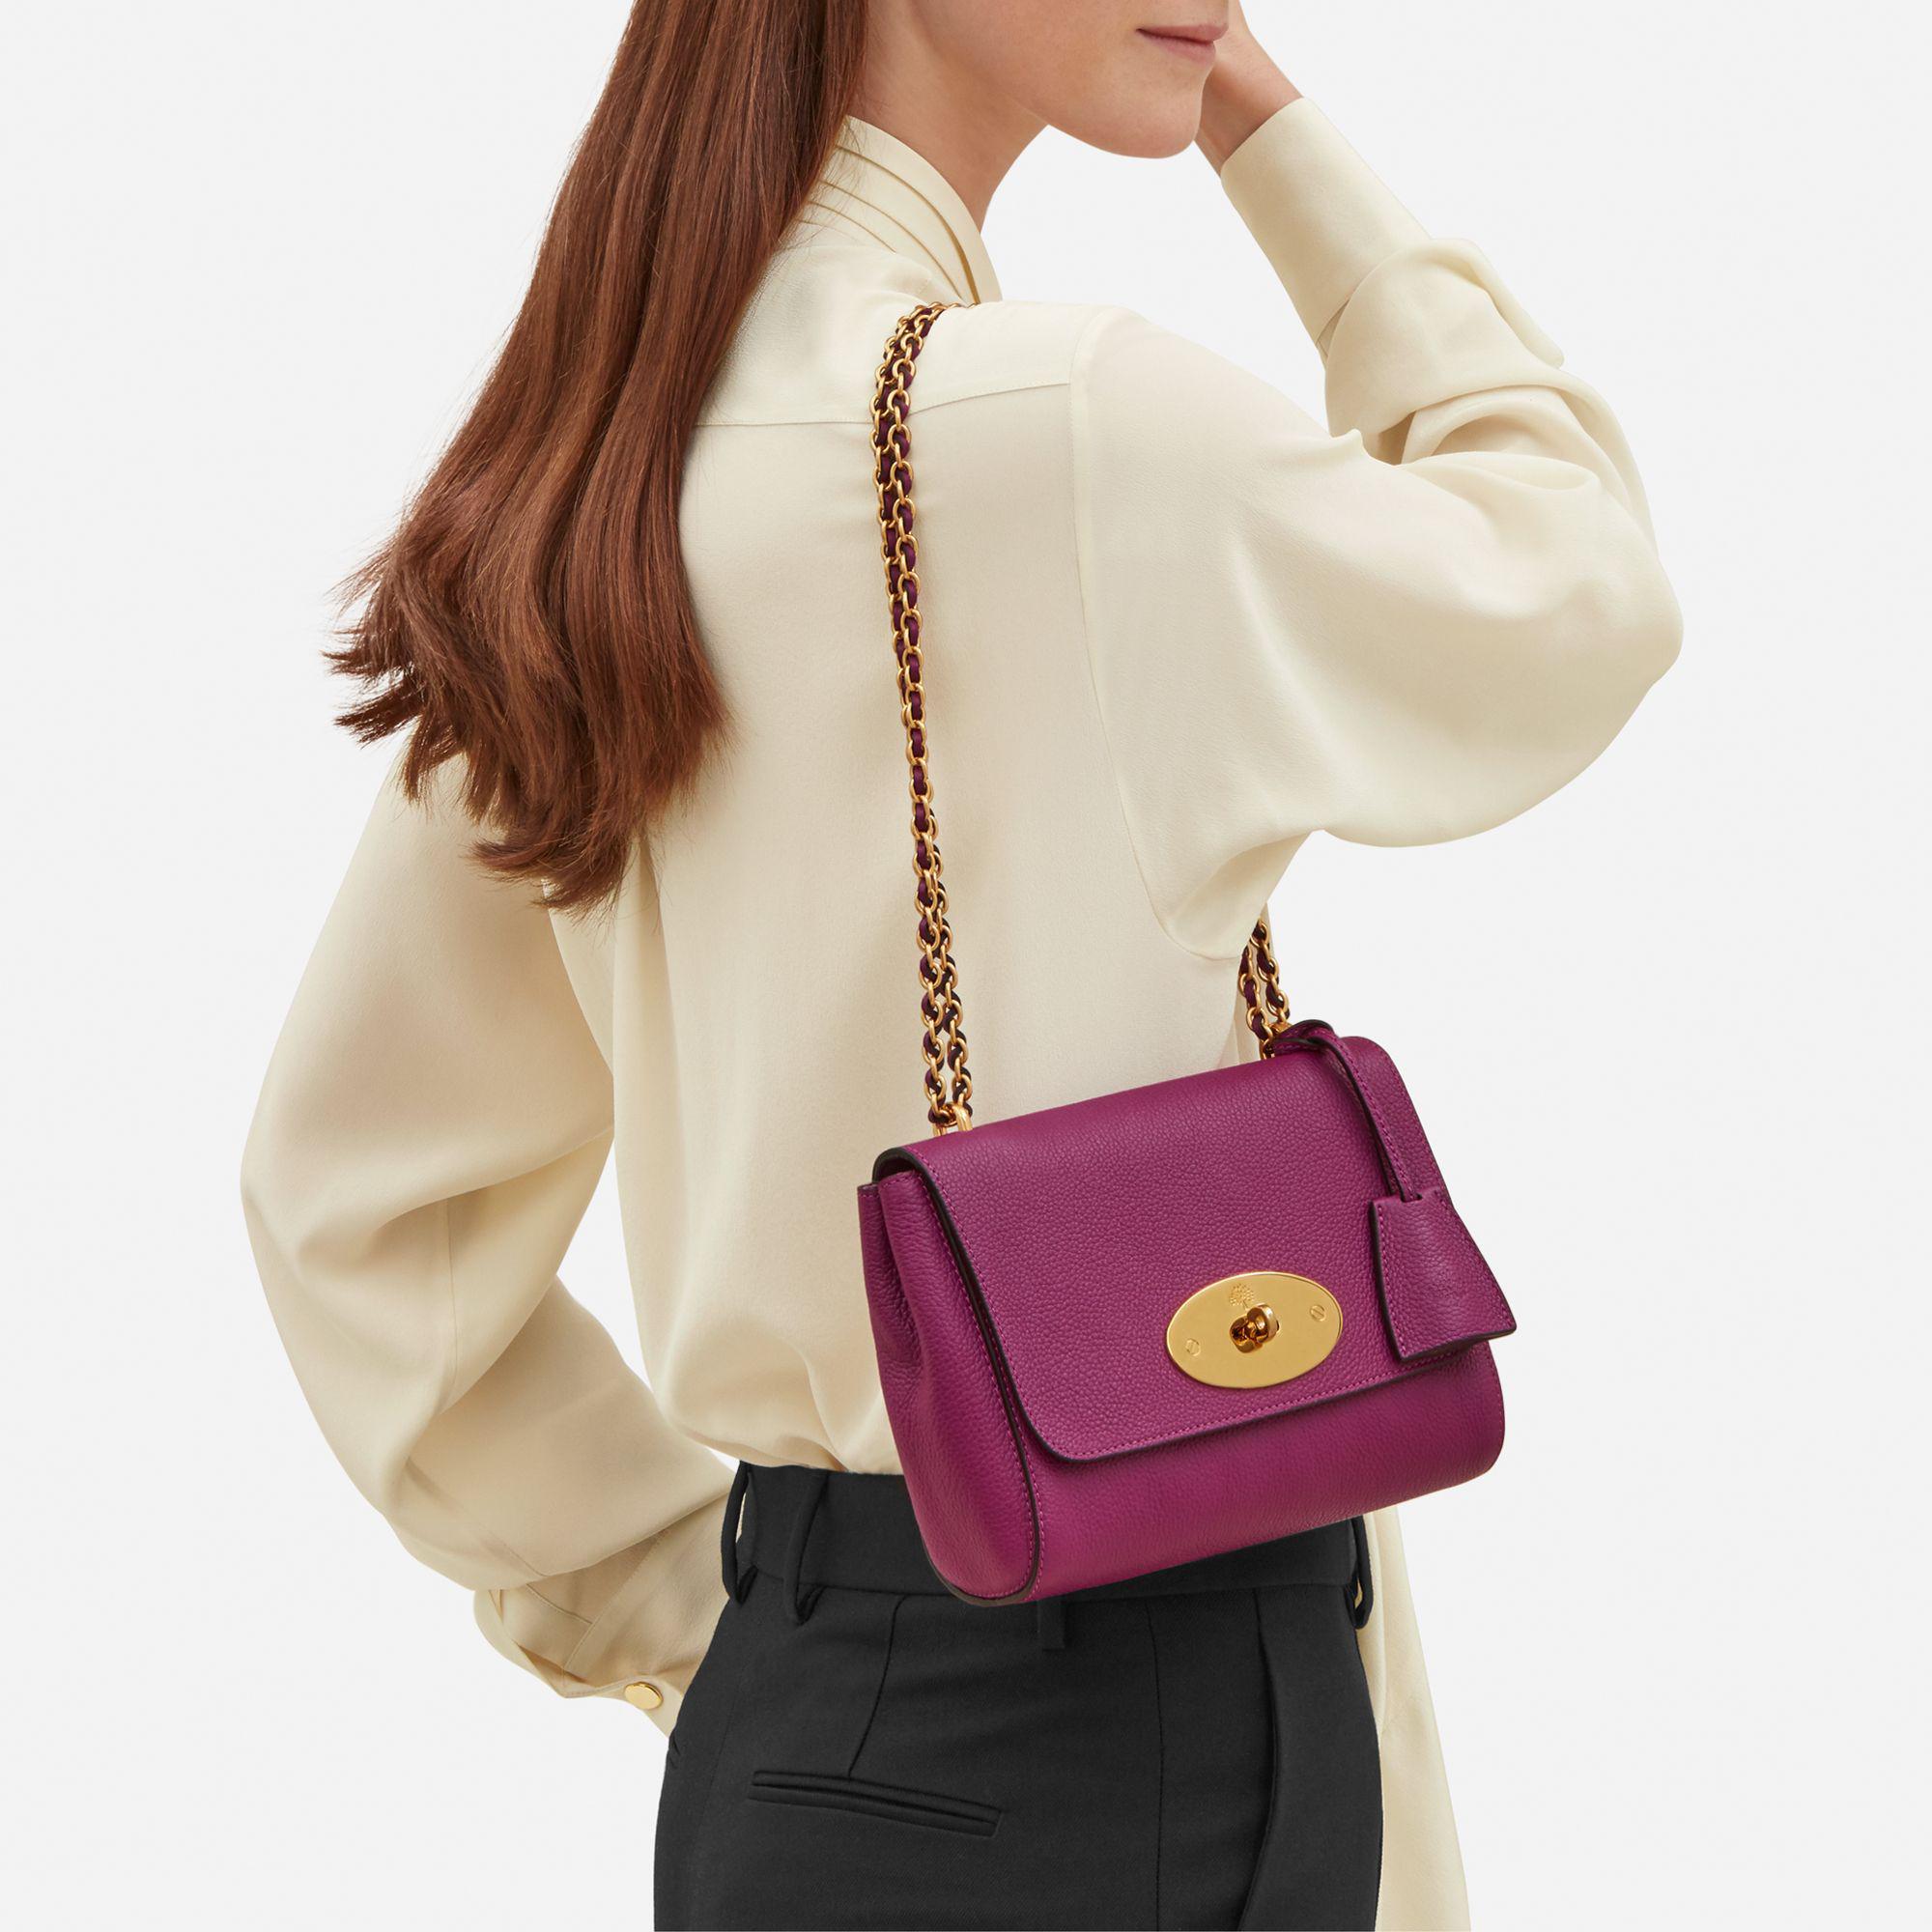 Mulberry Lily Shoulder Bag in Purple - Lyst